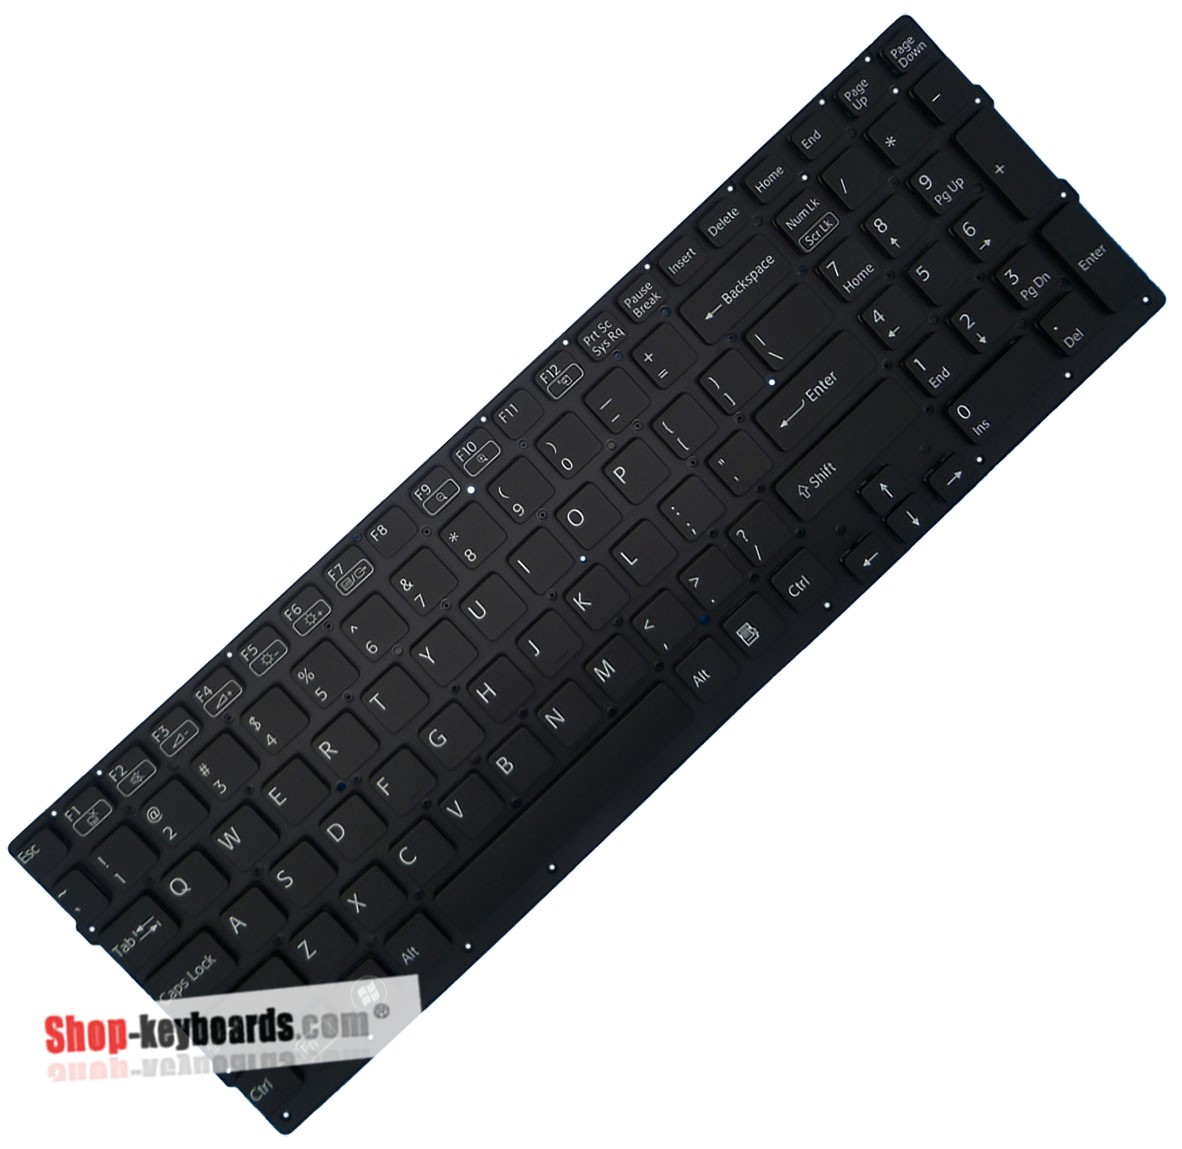 Sony VAIO VPC-CB48EC Keyboard replacement